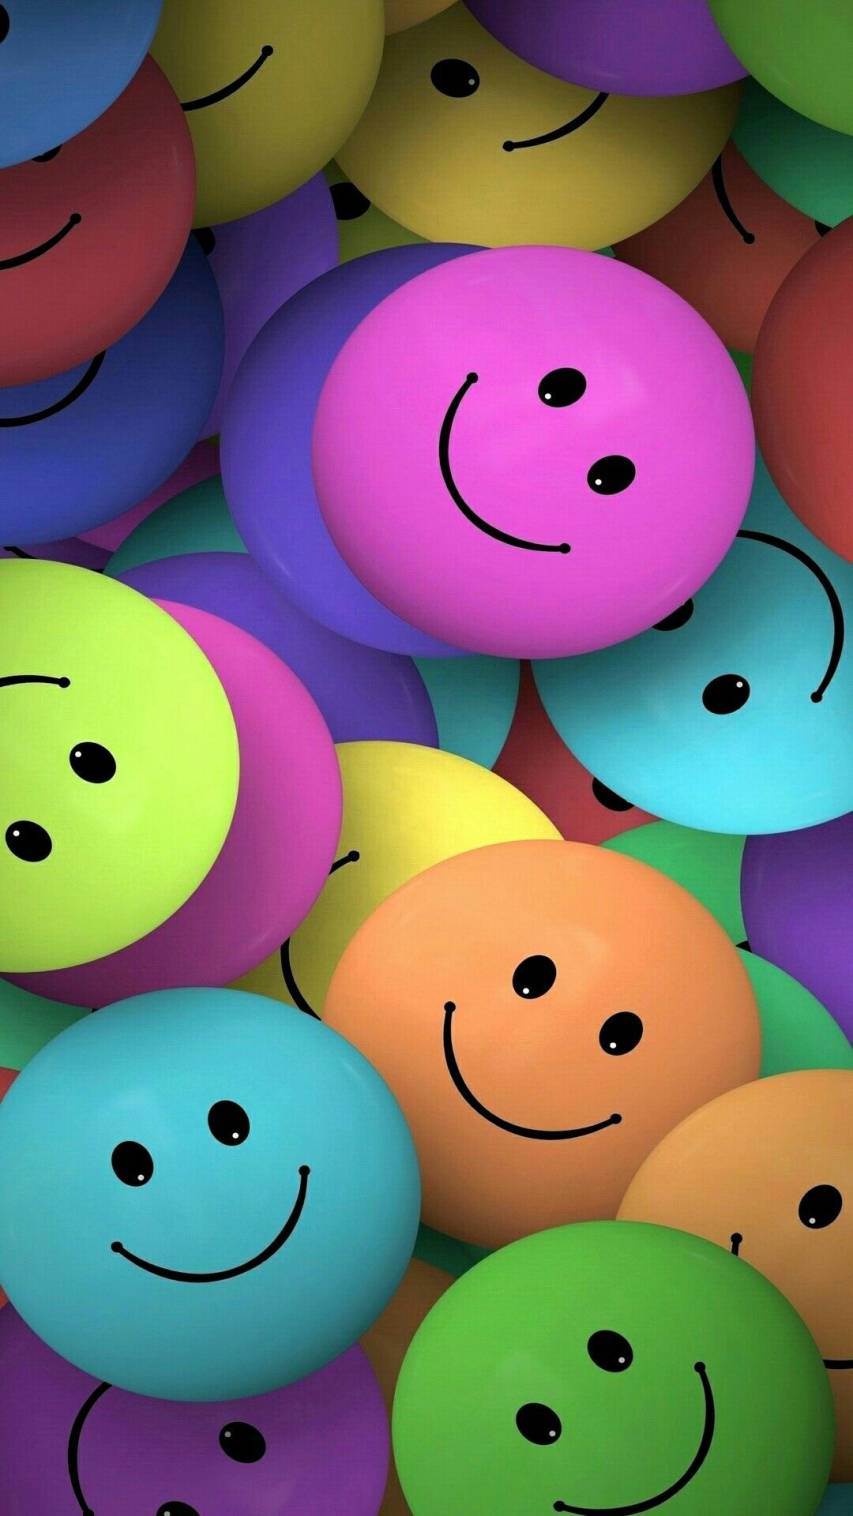 Download wallpaper 938x1668 ball smile smiley grass water iphone  876s6 for parallax hd background